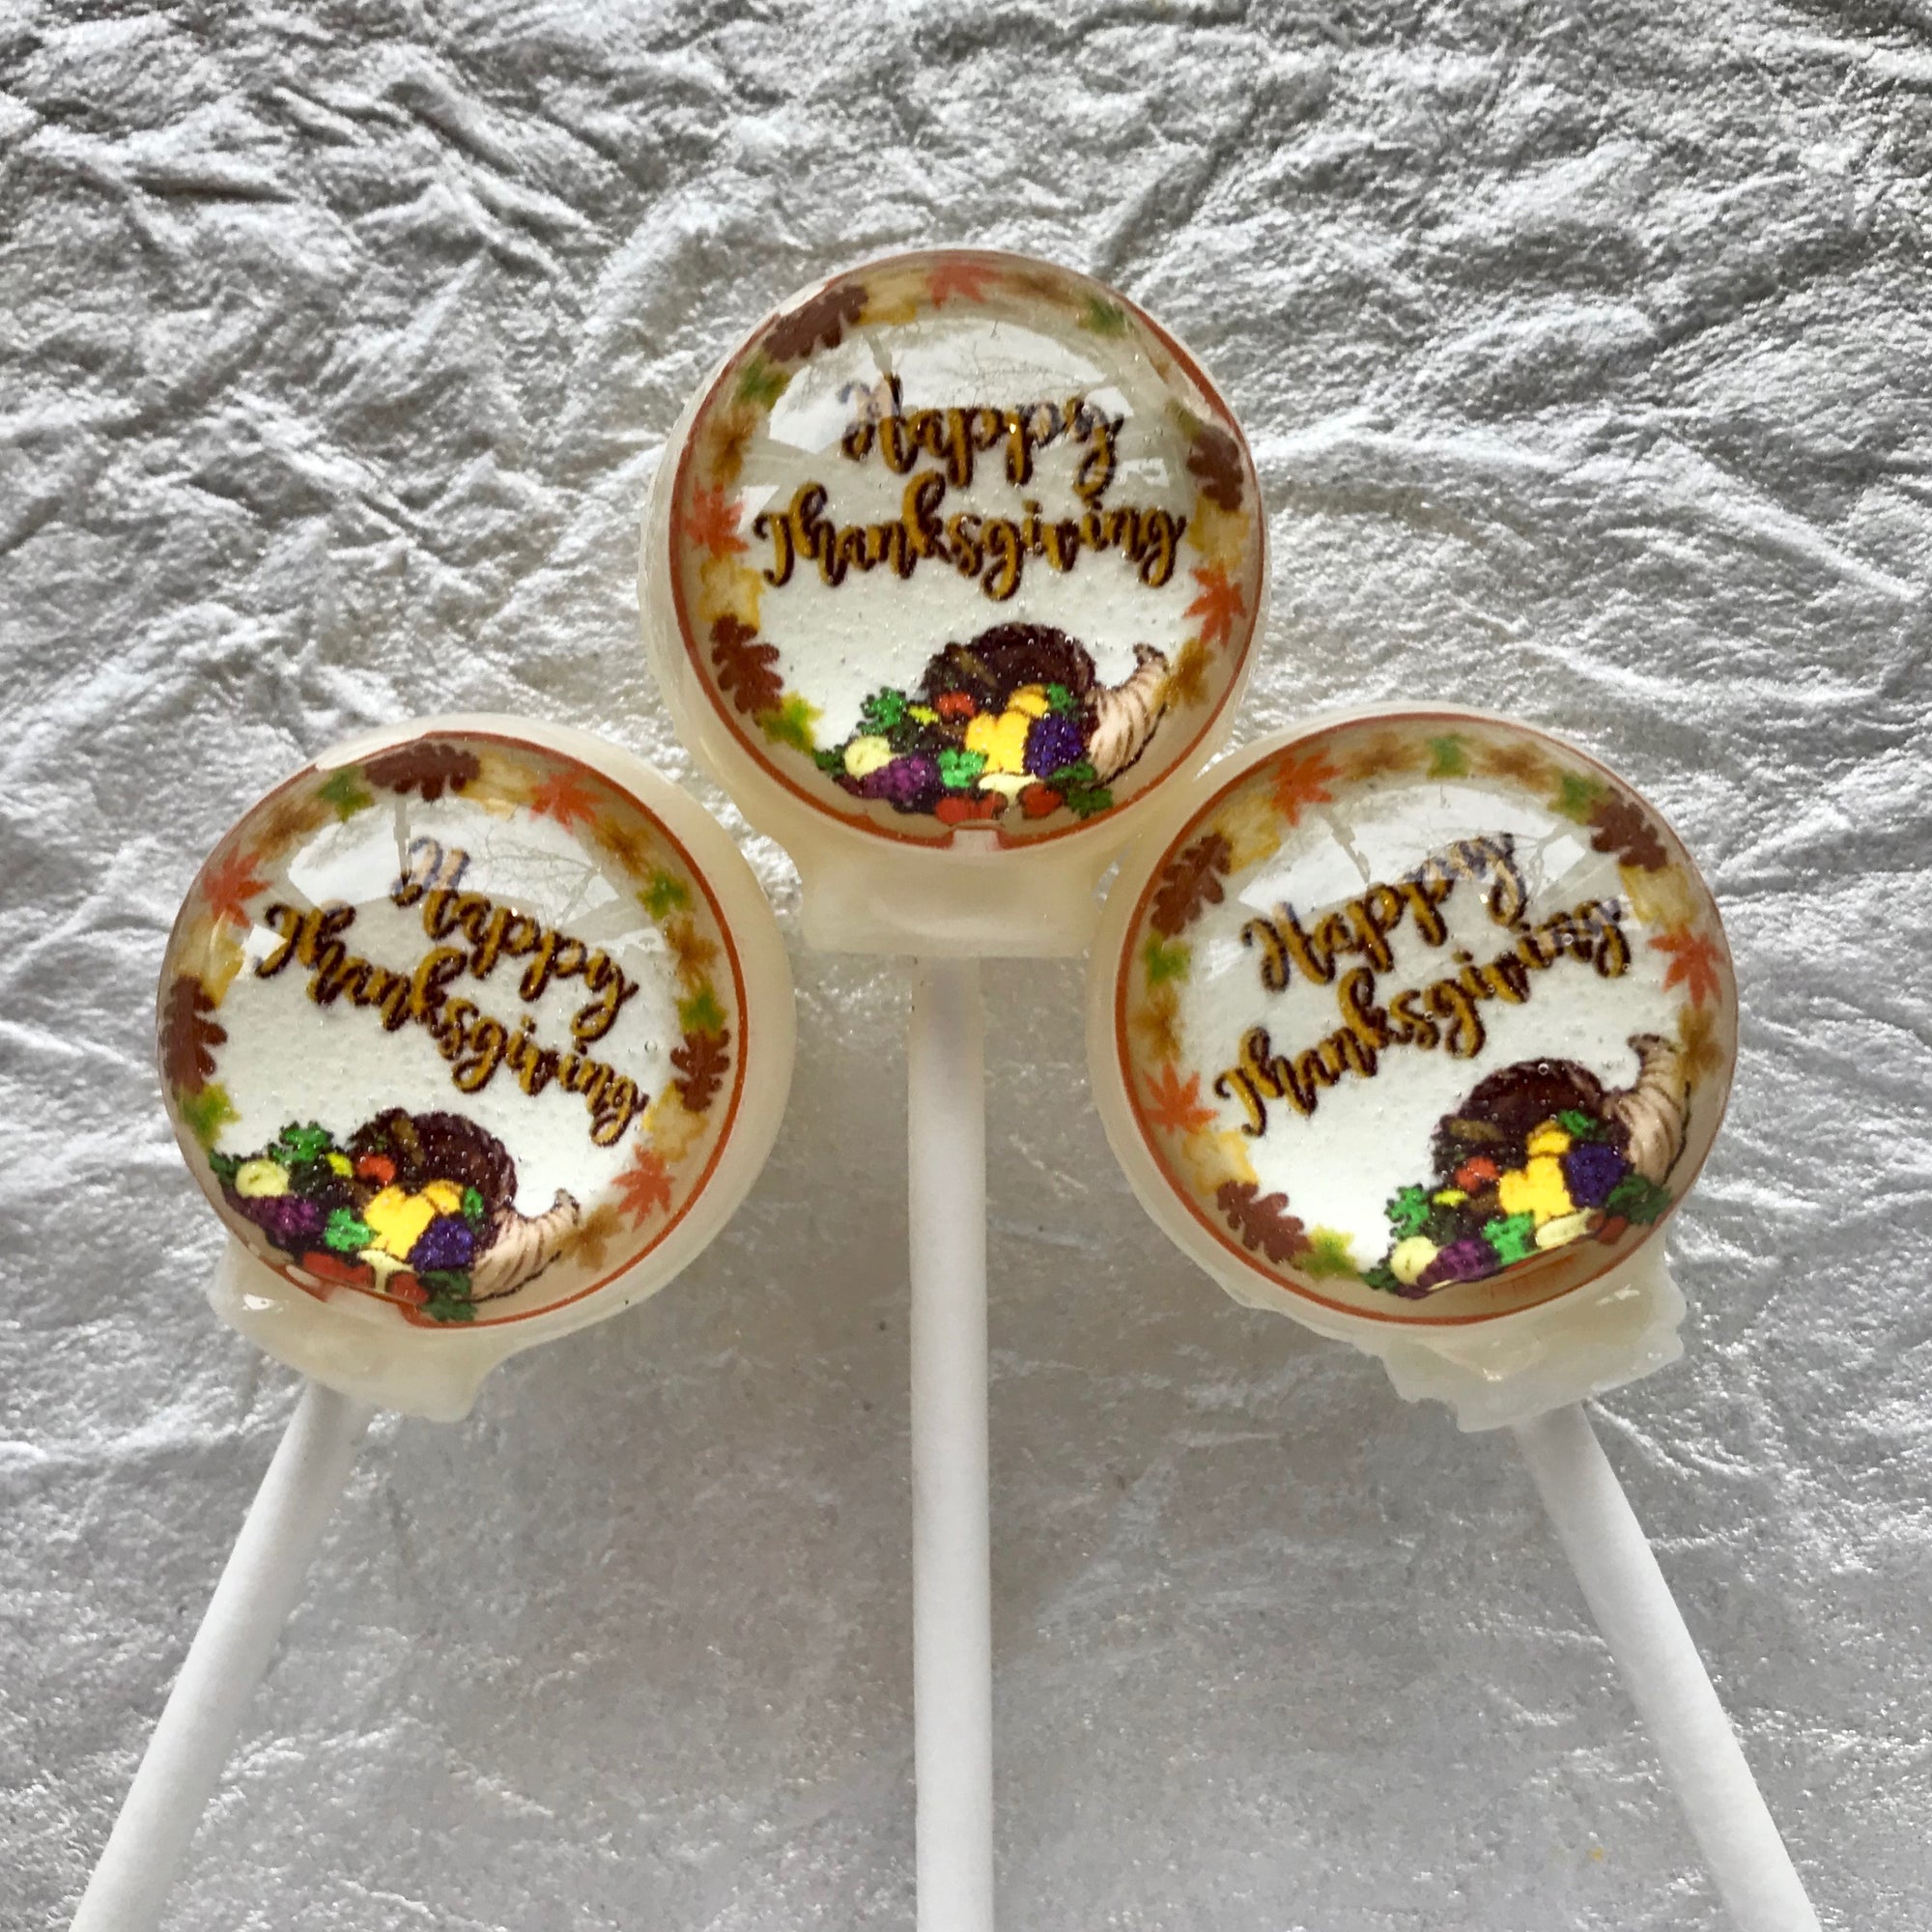 Thanksgiving Lollipops 6-piece set by I Want Candy!